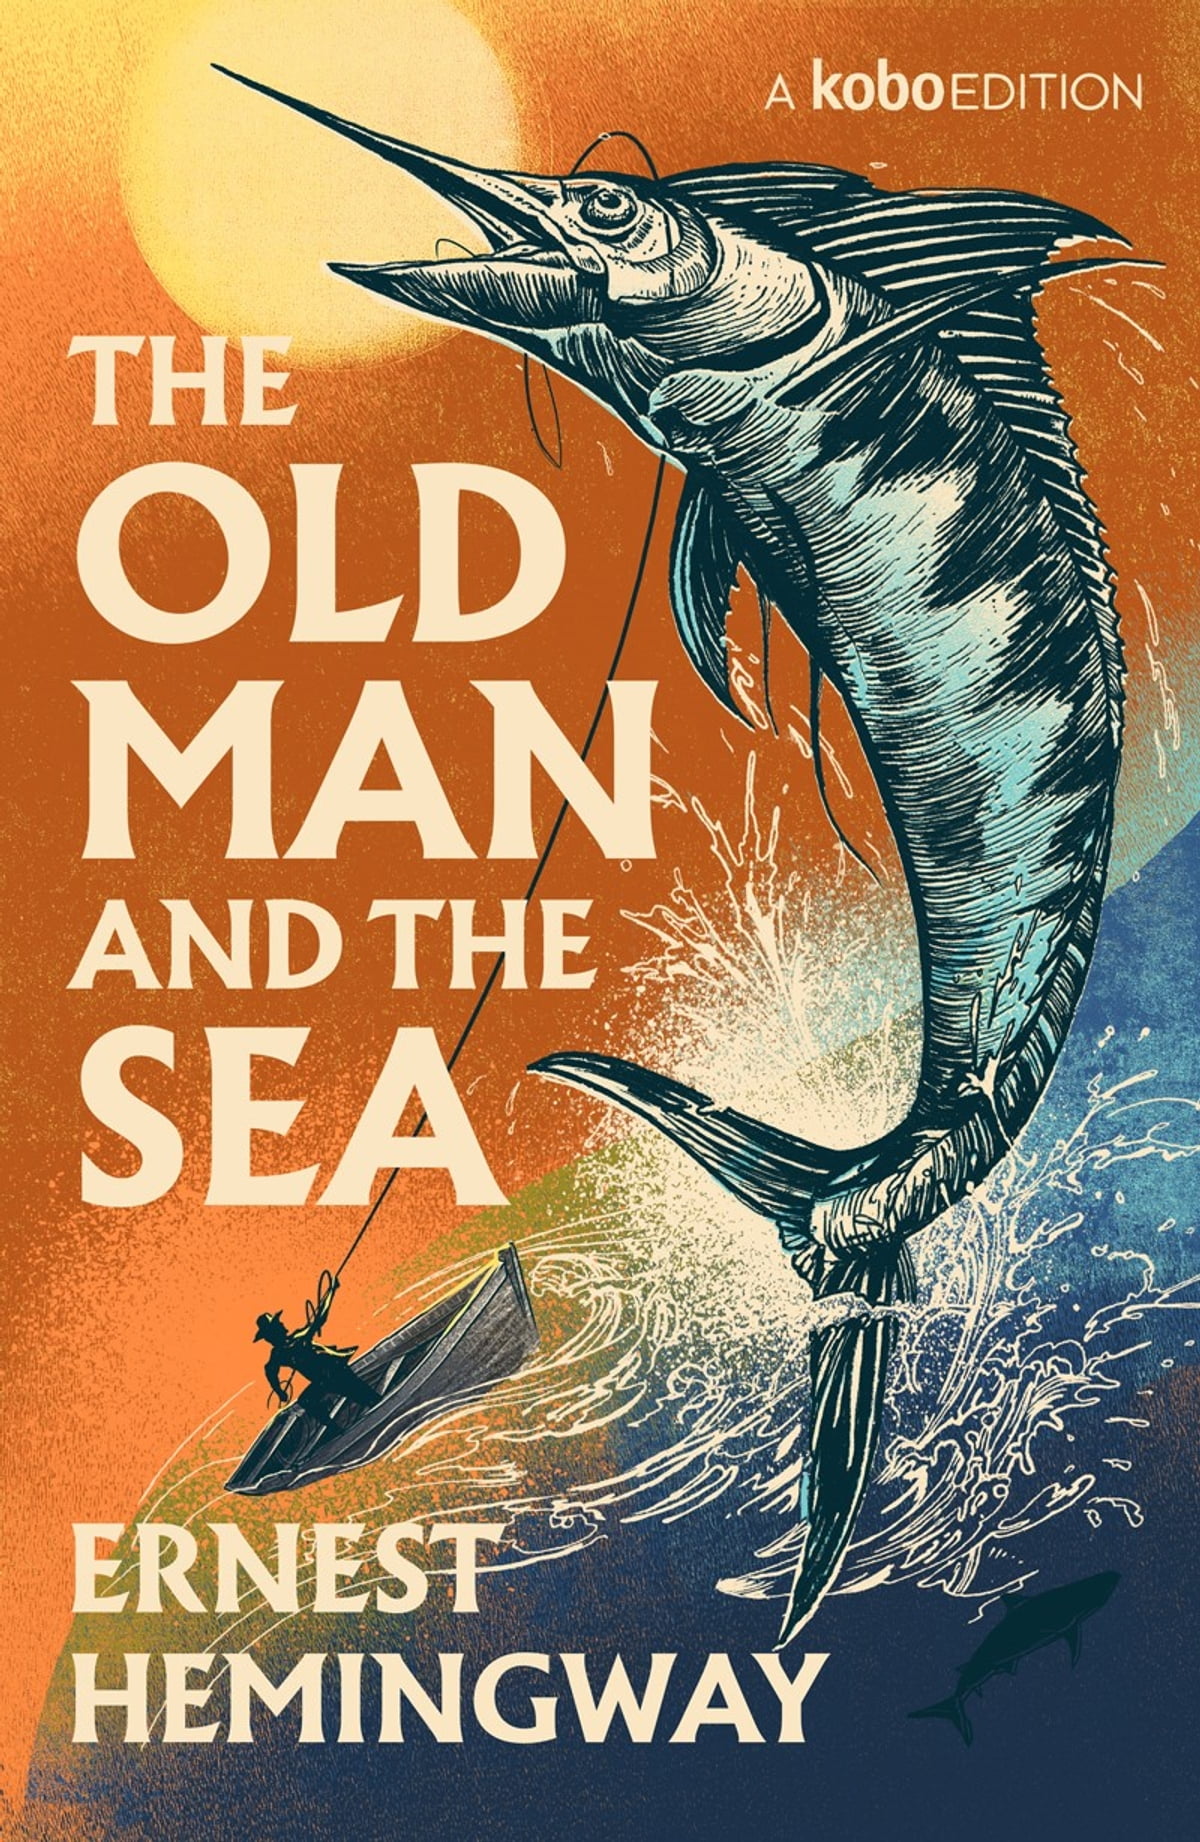 The Old Man and the Sea audiobook